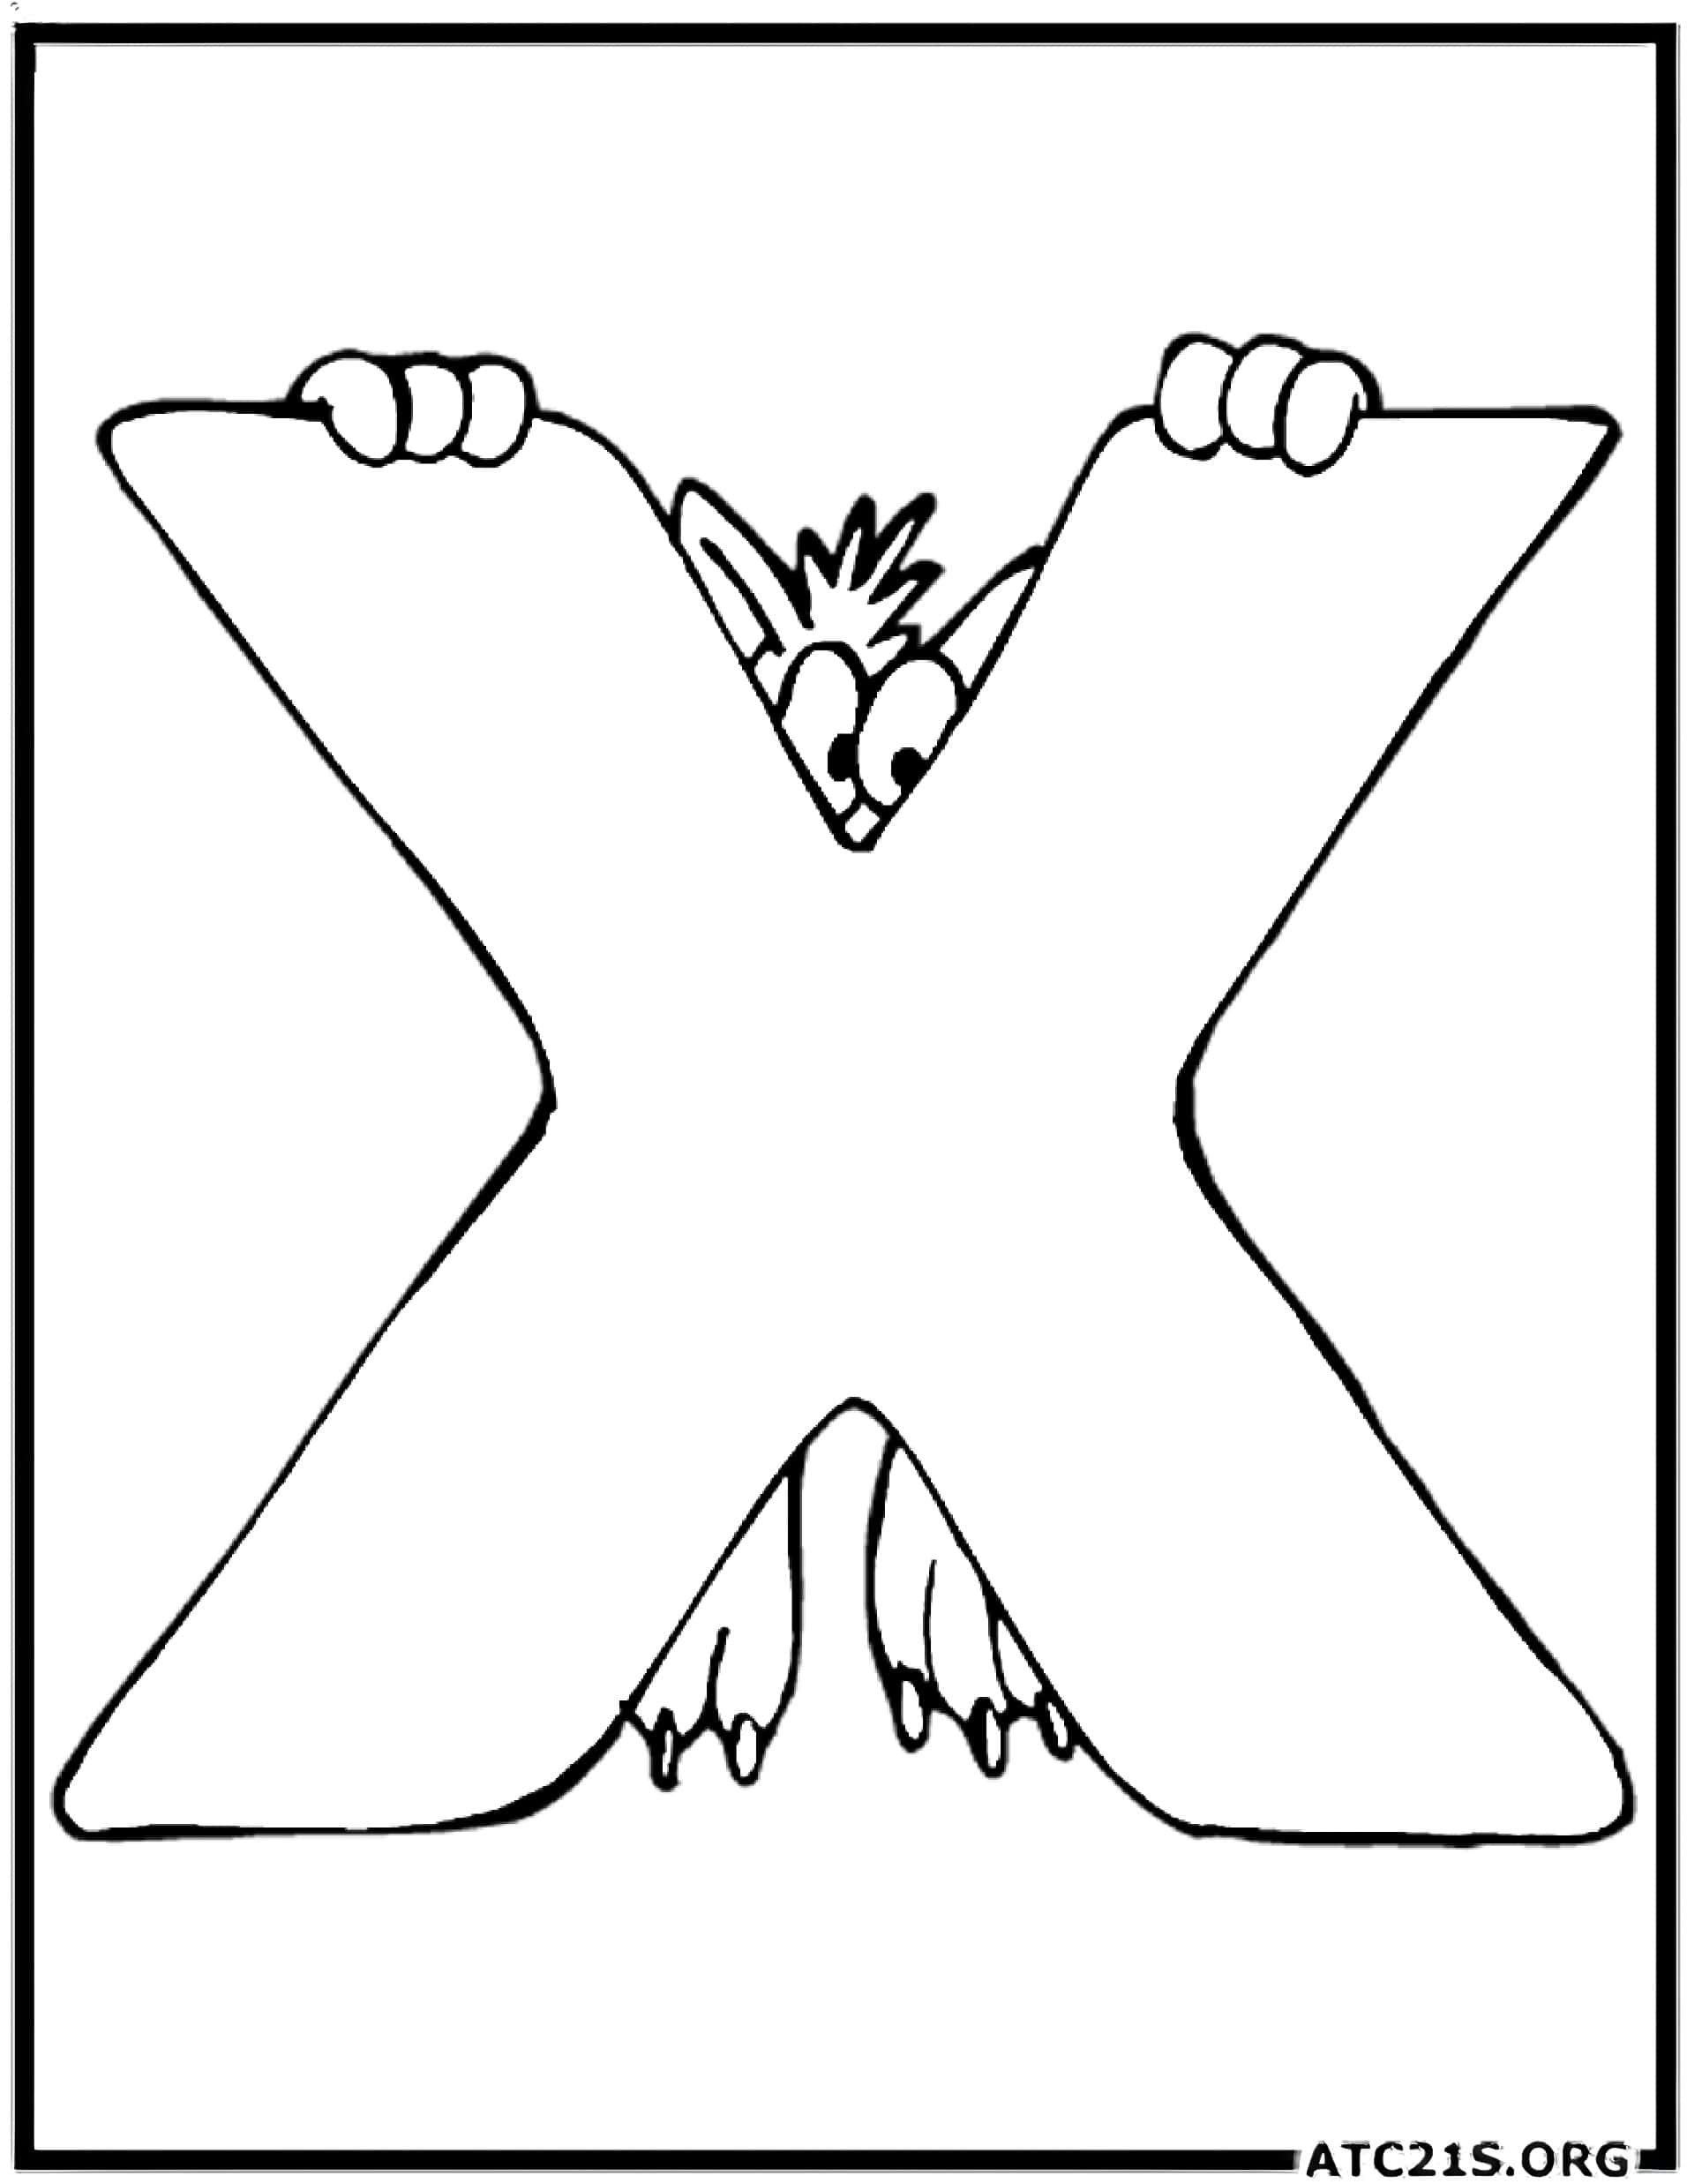 letter_x_coloring_page_1